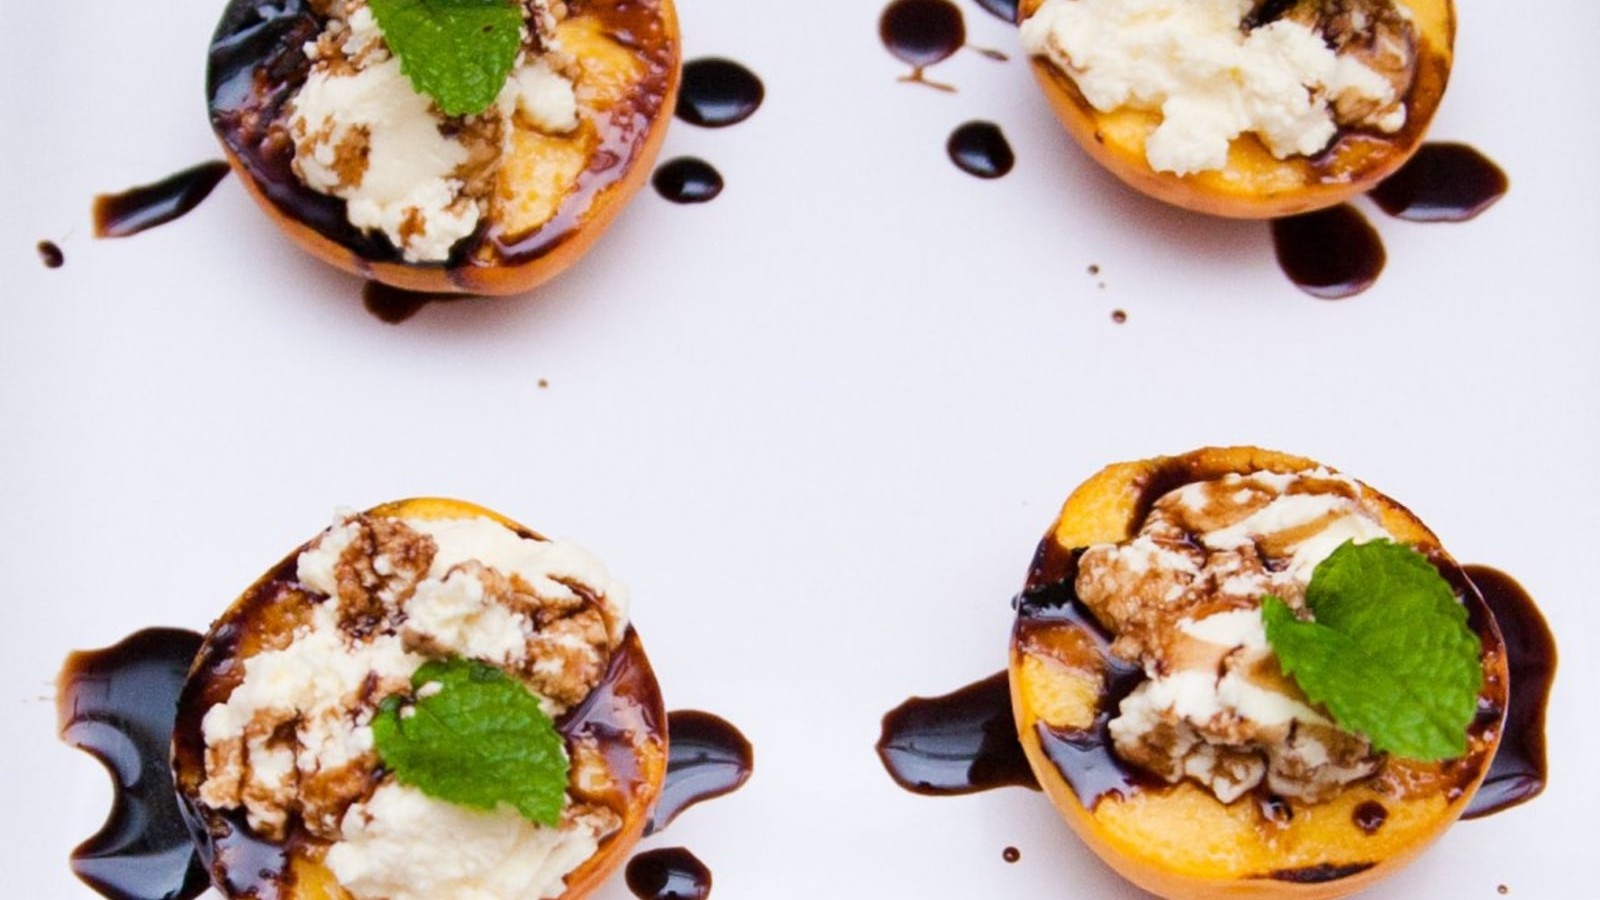 Image of Grilled Cinnamon Peaches